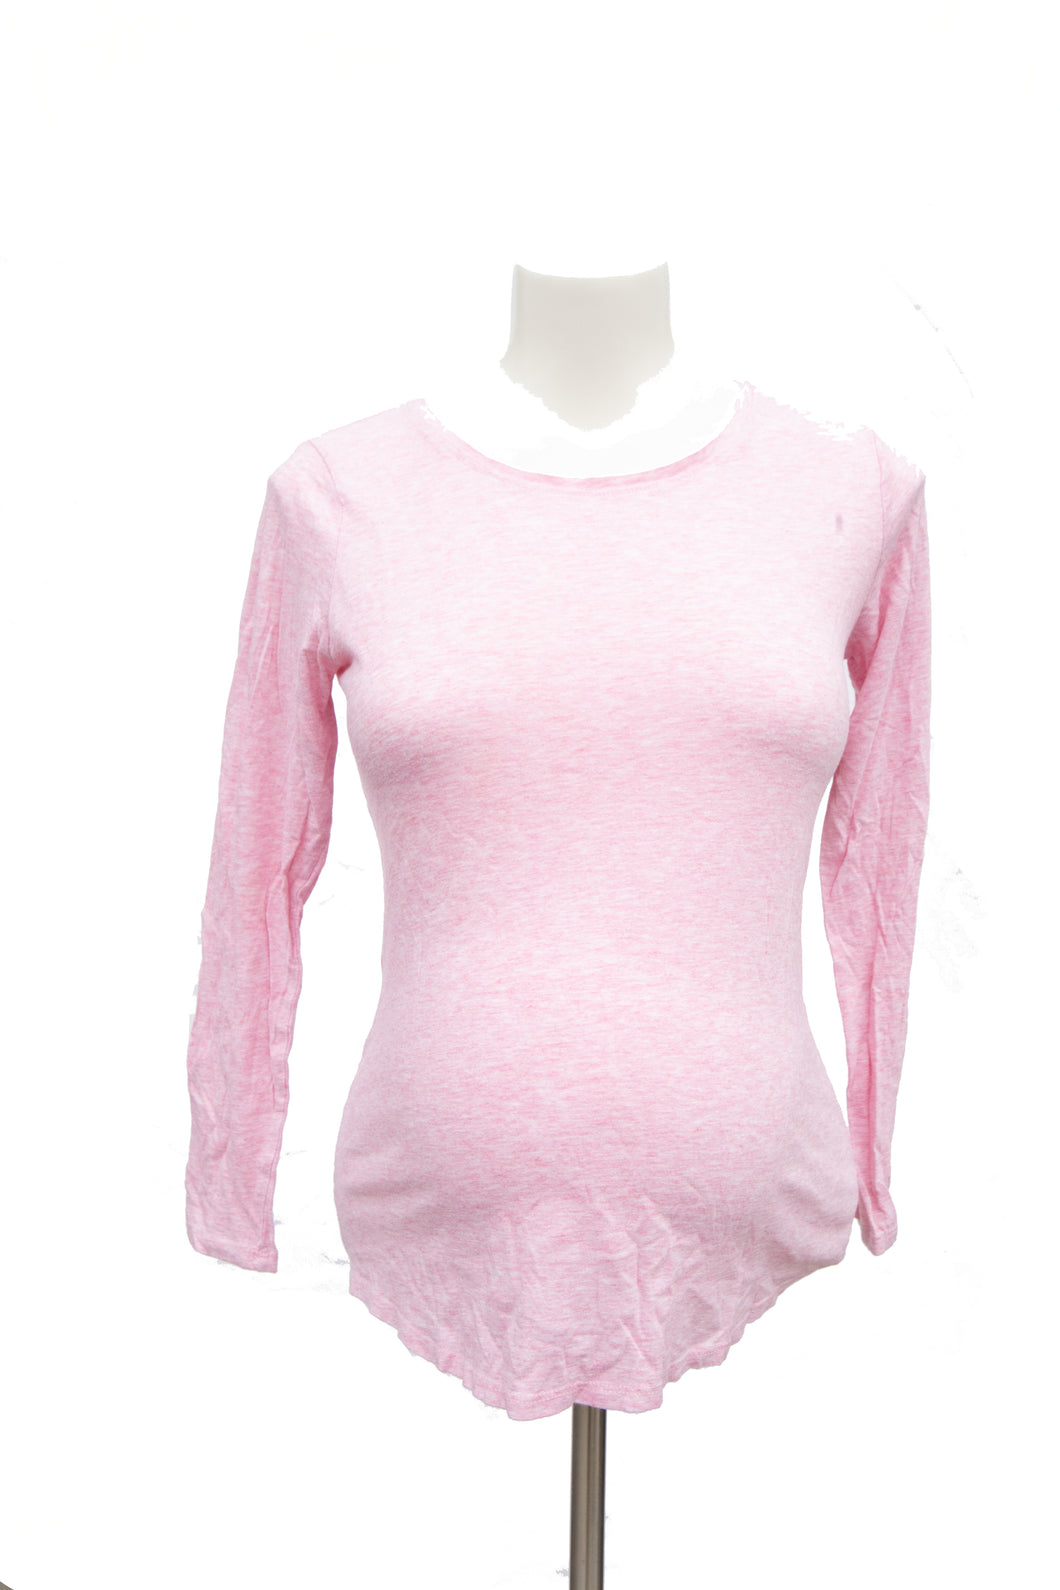 M George Maternity Long Sleeve Top in Pink